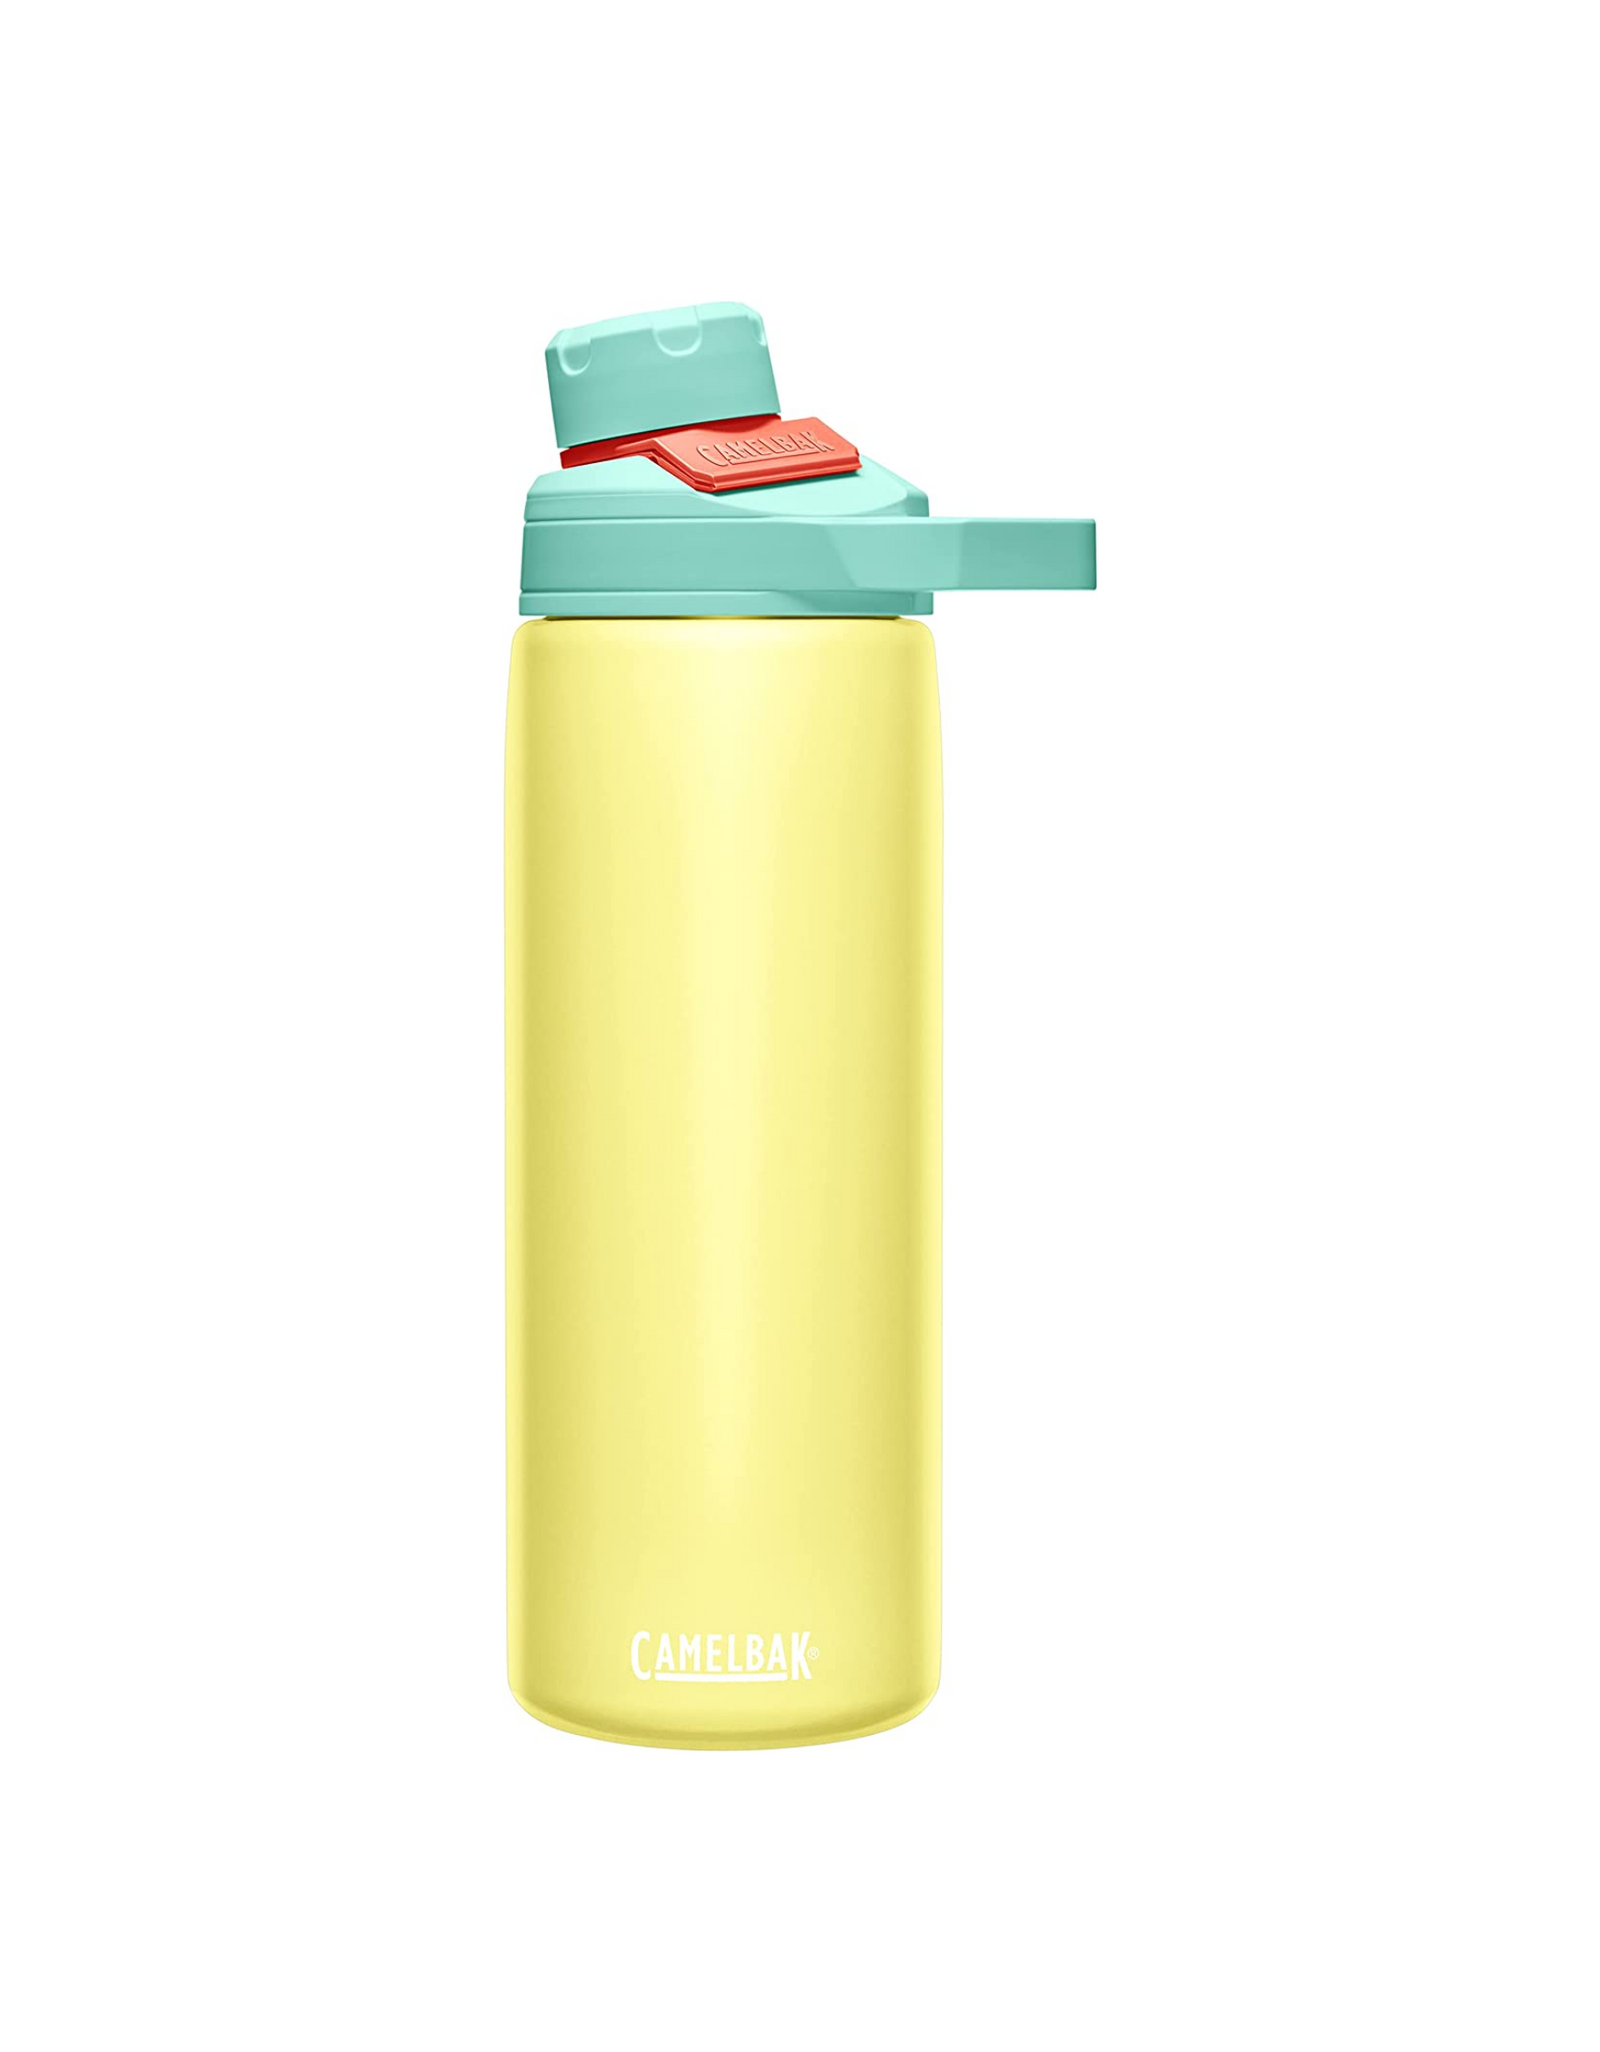 CamelBak Chute Mag Water Bottle, Insulated Stainless Steel, 20 oz, Seeker Yellow